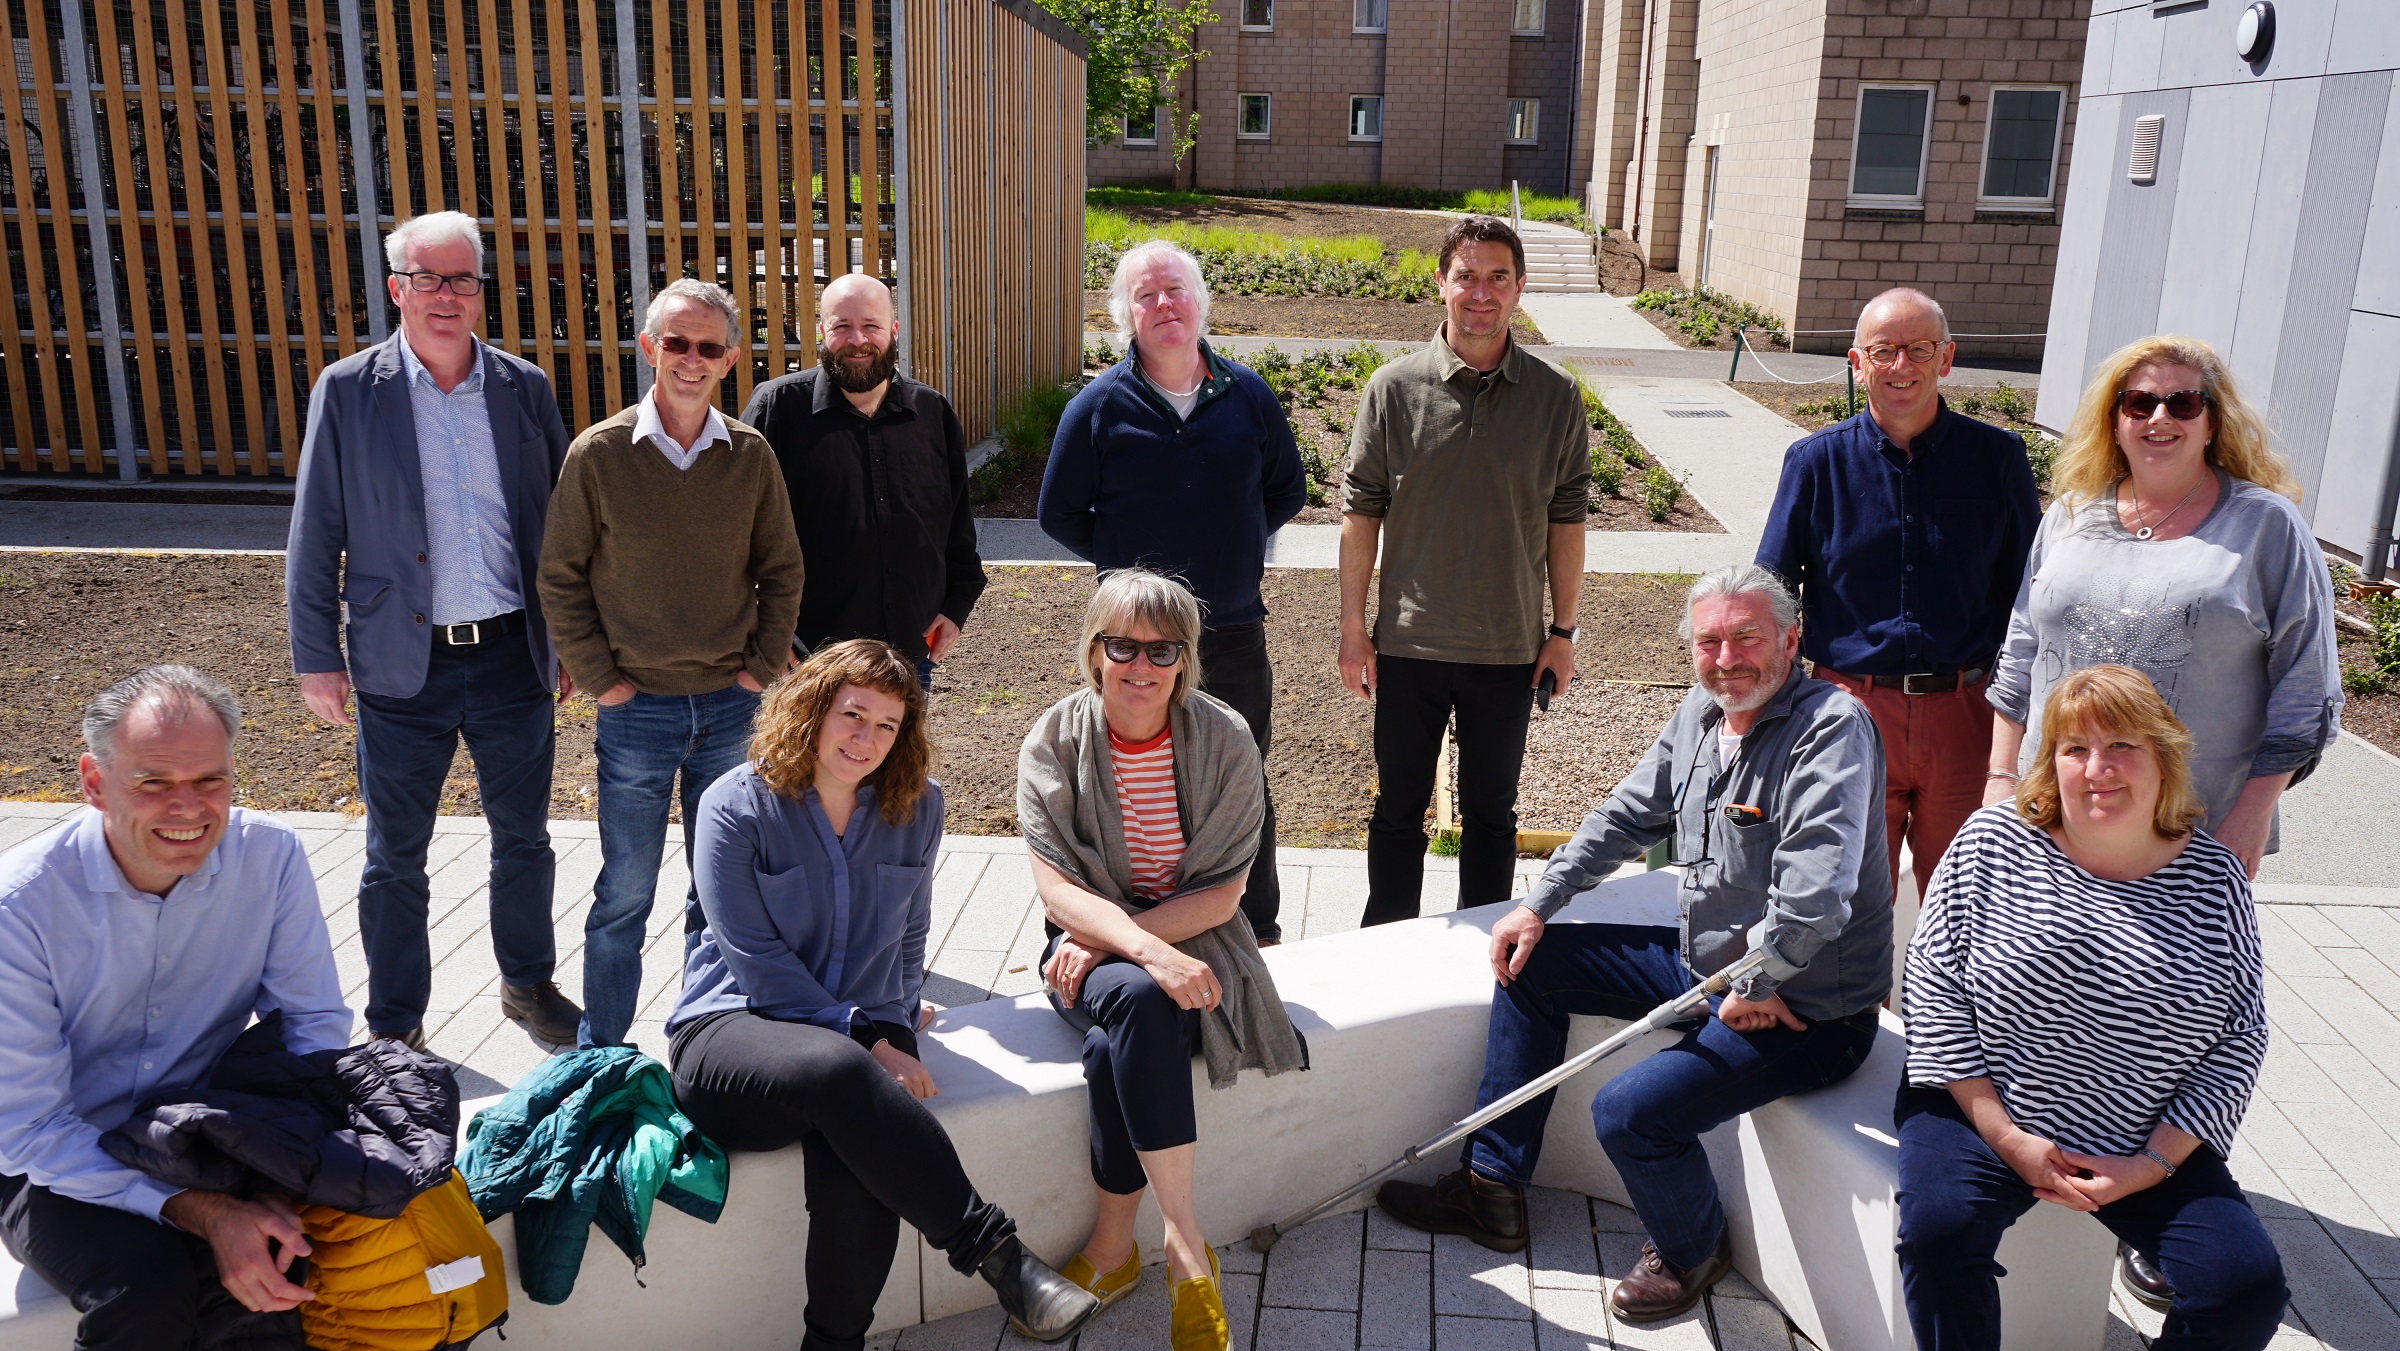 Architects and house-builders shortlisted for Saltire Society Housing Design Awards 2019